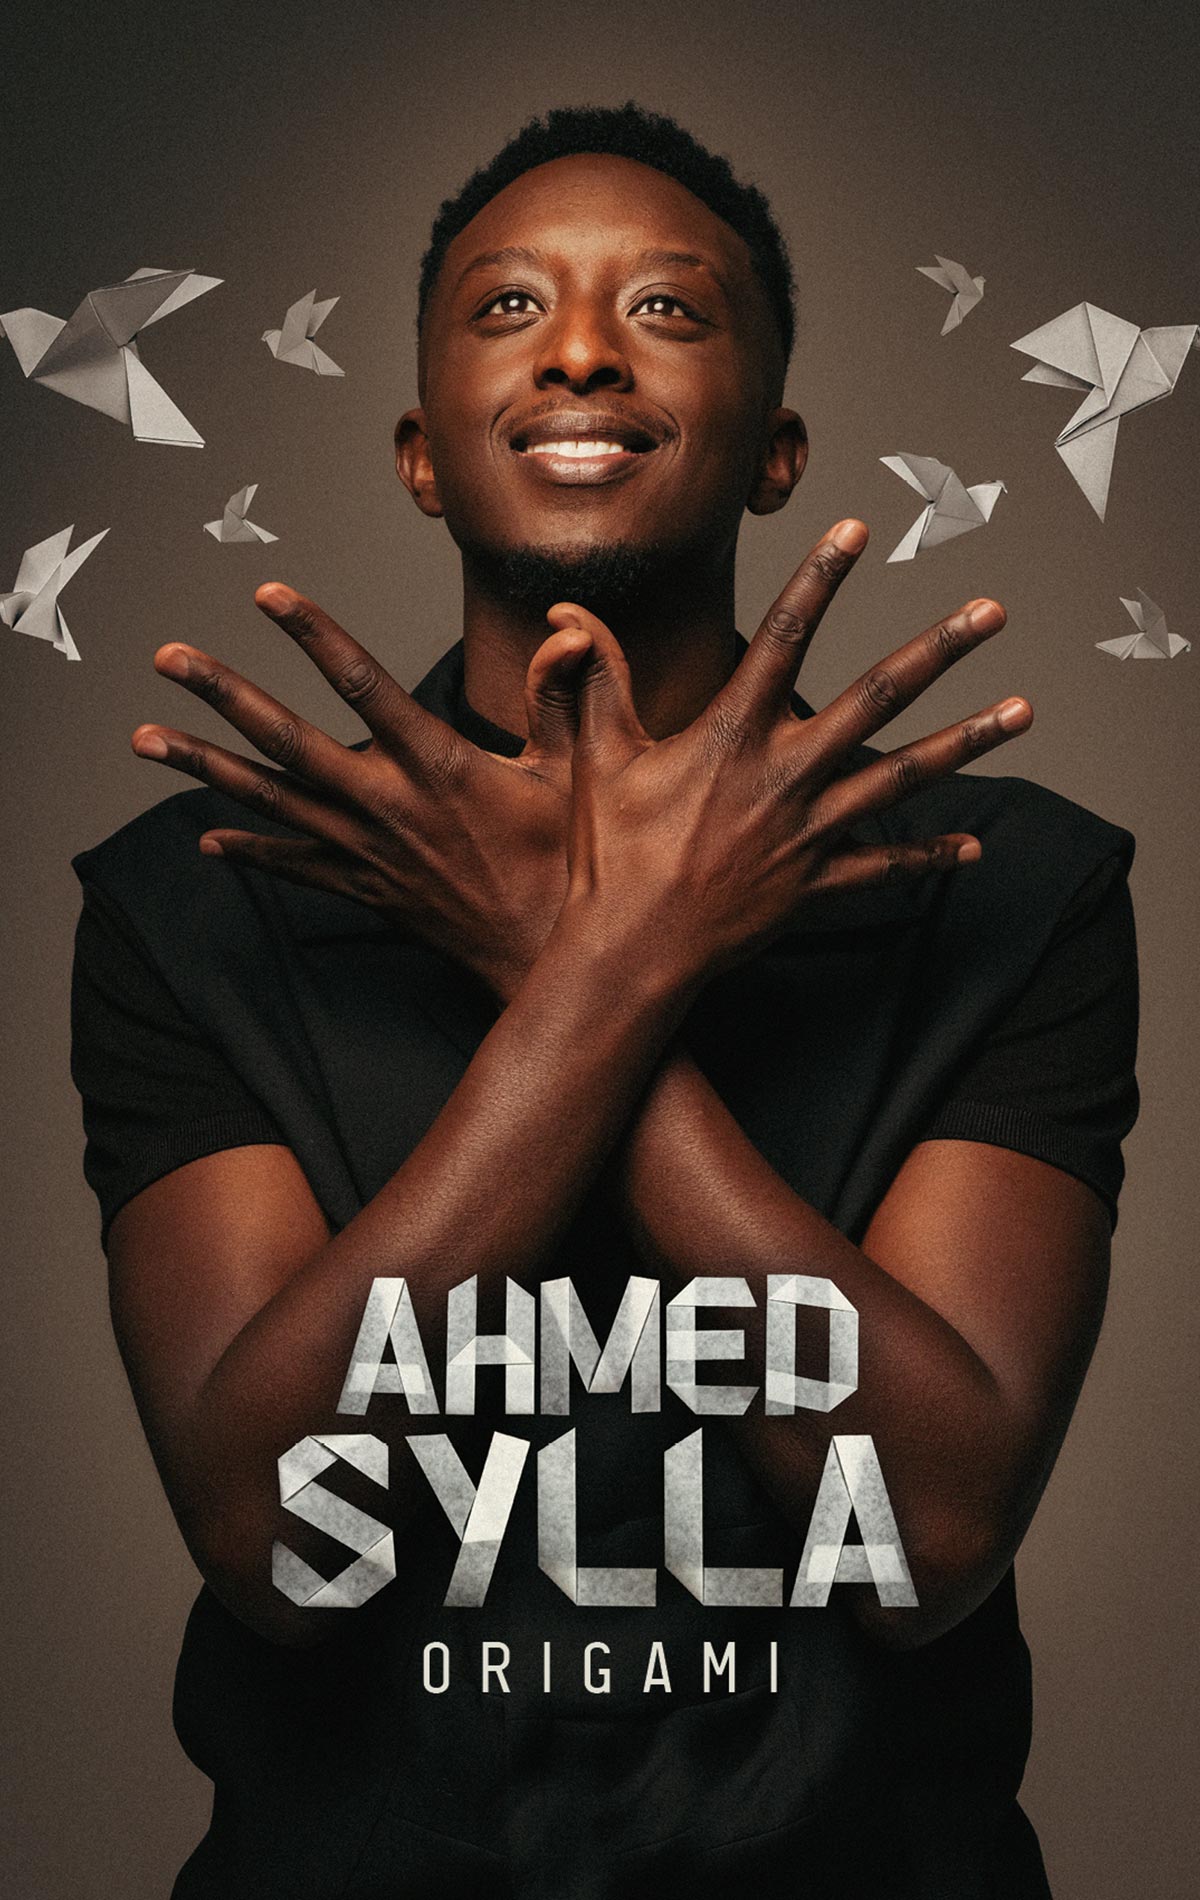 Ahmed Sylla at Centre des Congres Angers Tickets